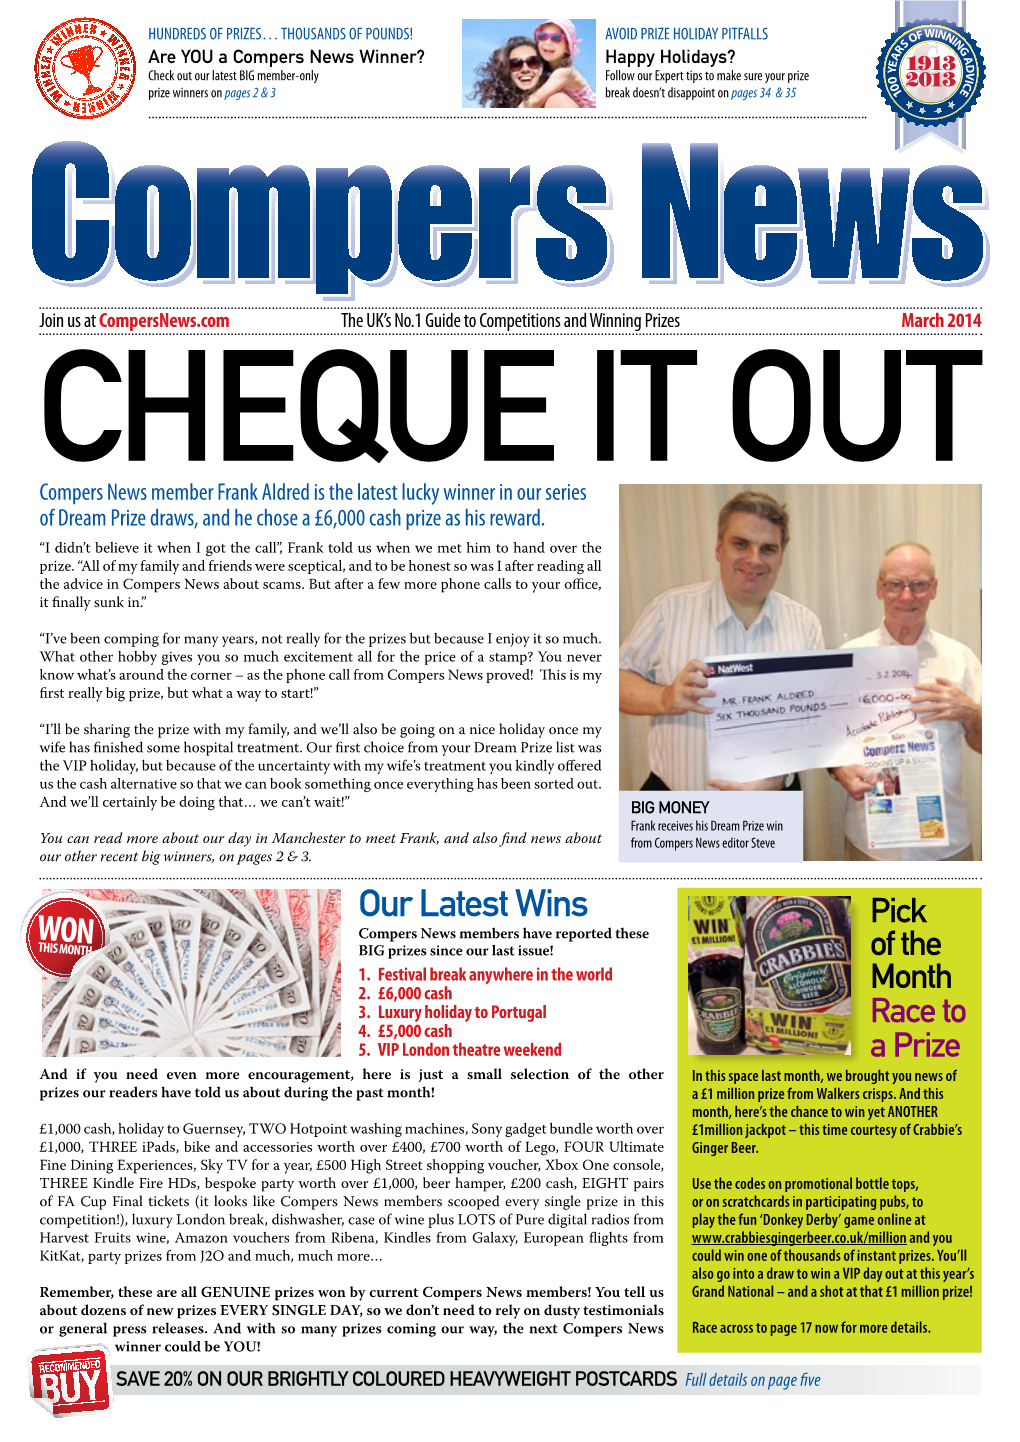 Our Latest Wins Pick Compers News Members Have Reported These THIS MONTH BIG Prizes Since Our Last Issue! of the 1